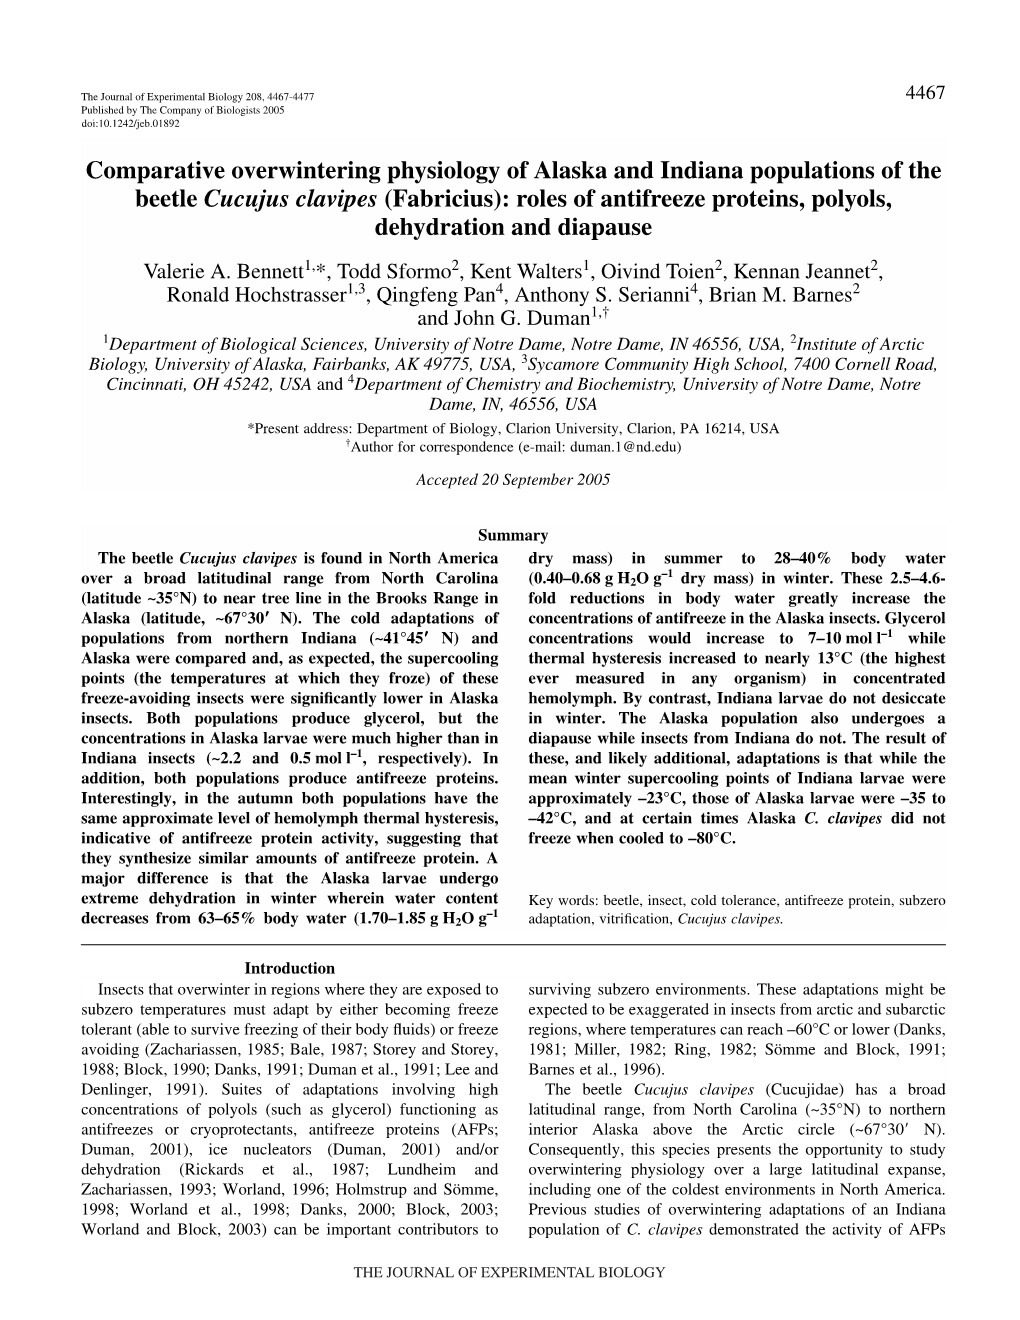 Comparative Overwintering Physiology of Alaska and Indiana Populations of the Beetle Cucujus Clavipes (Fabricius): Roles of Anti